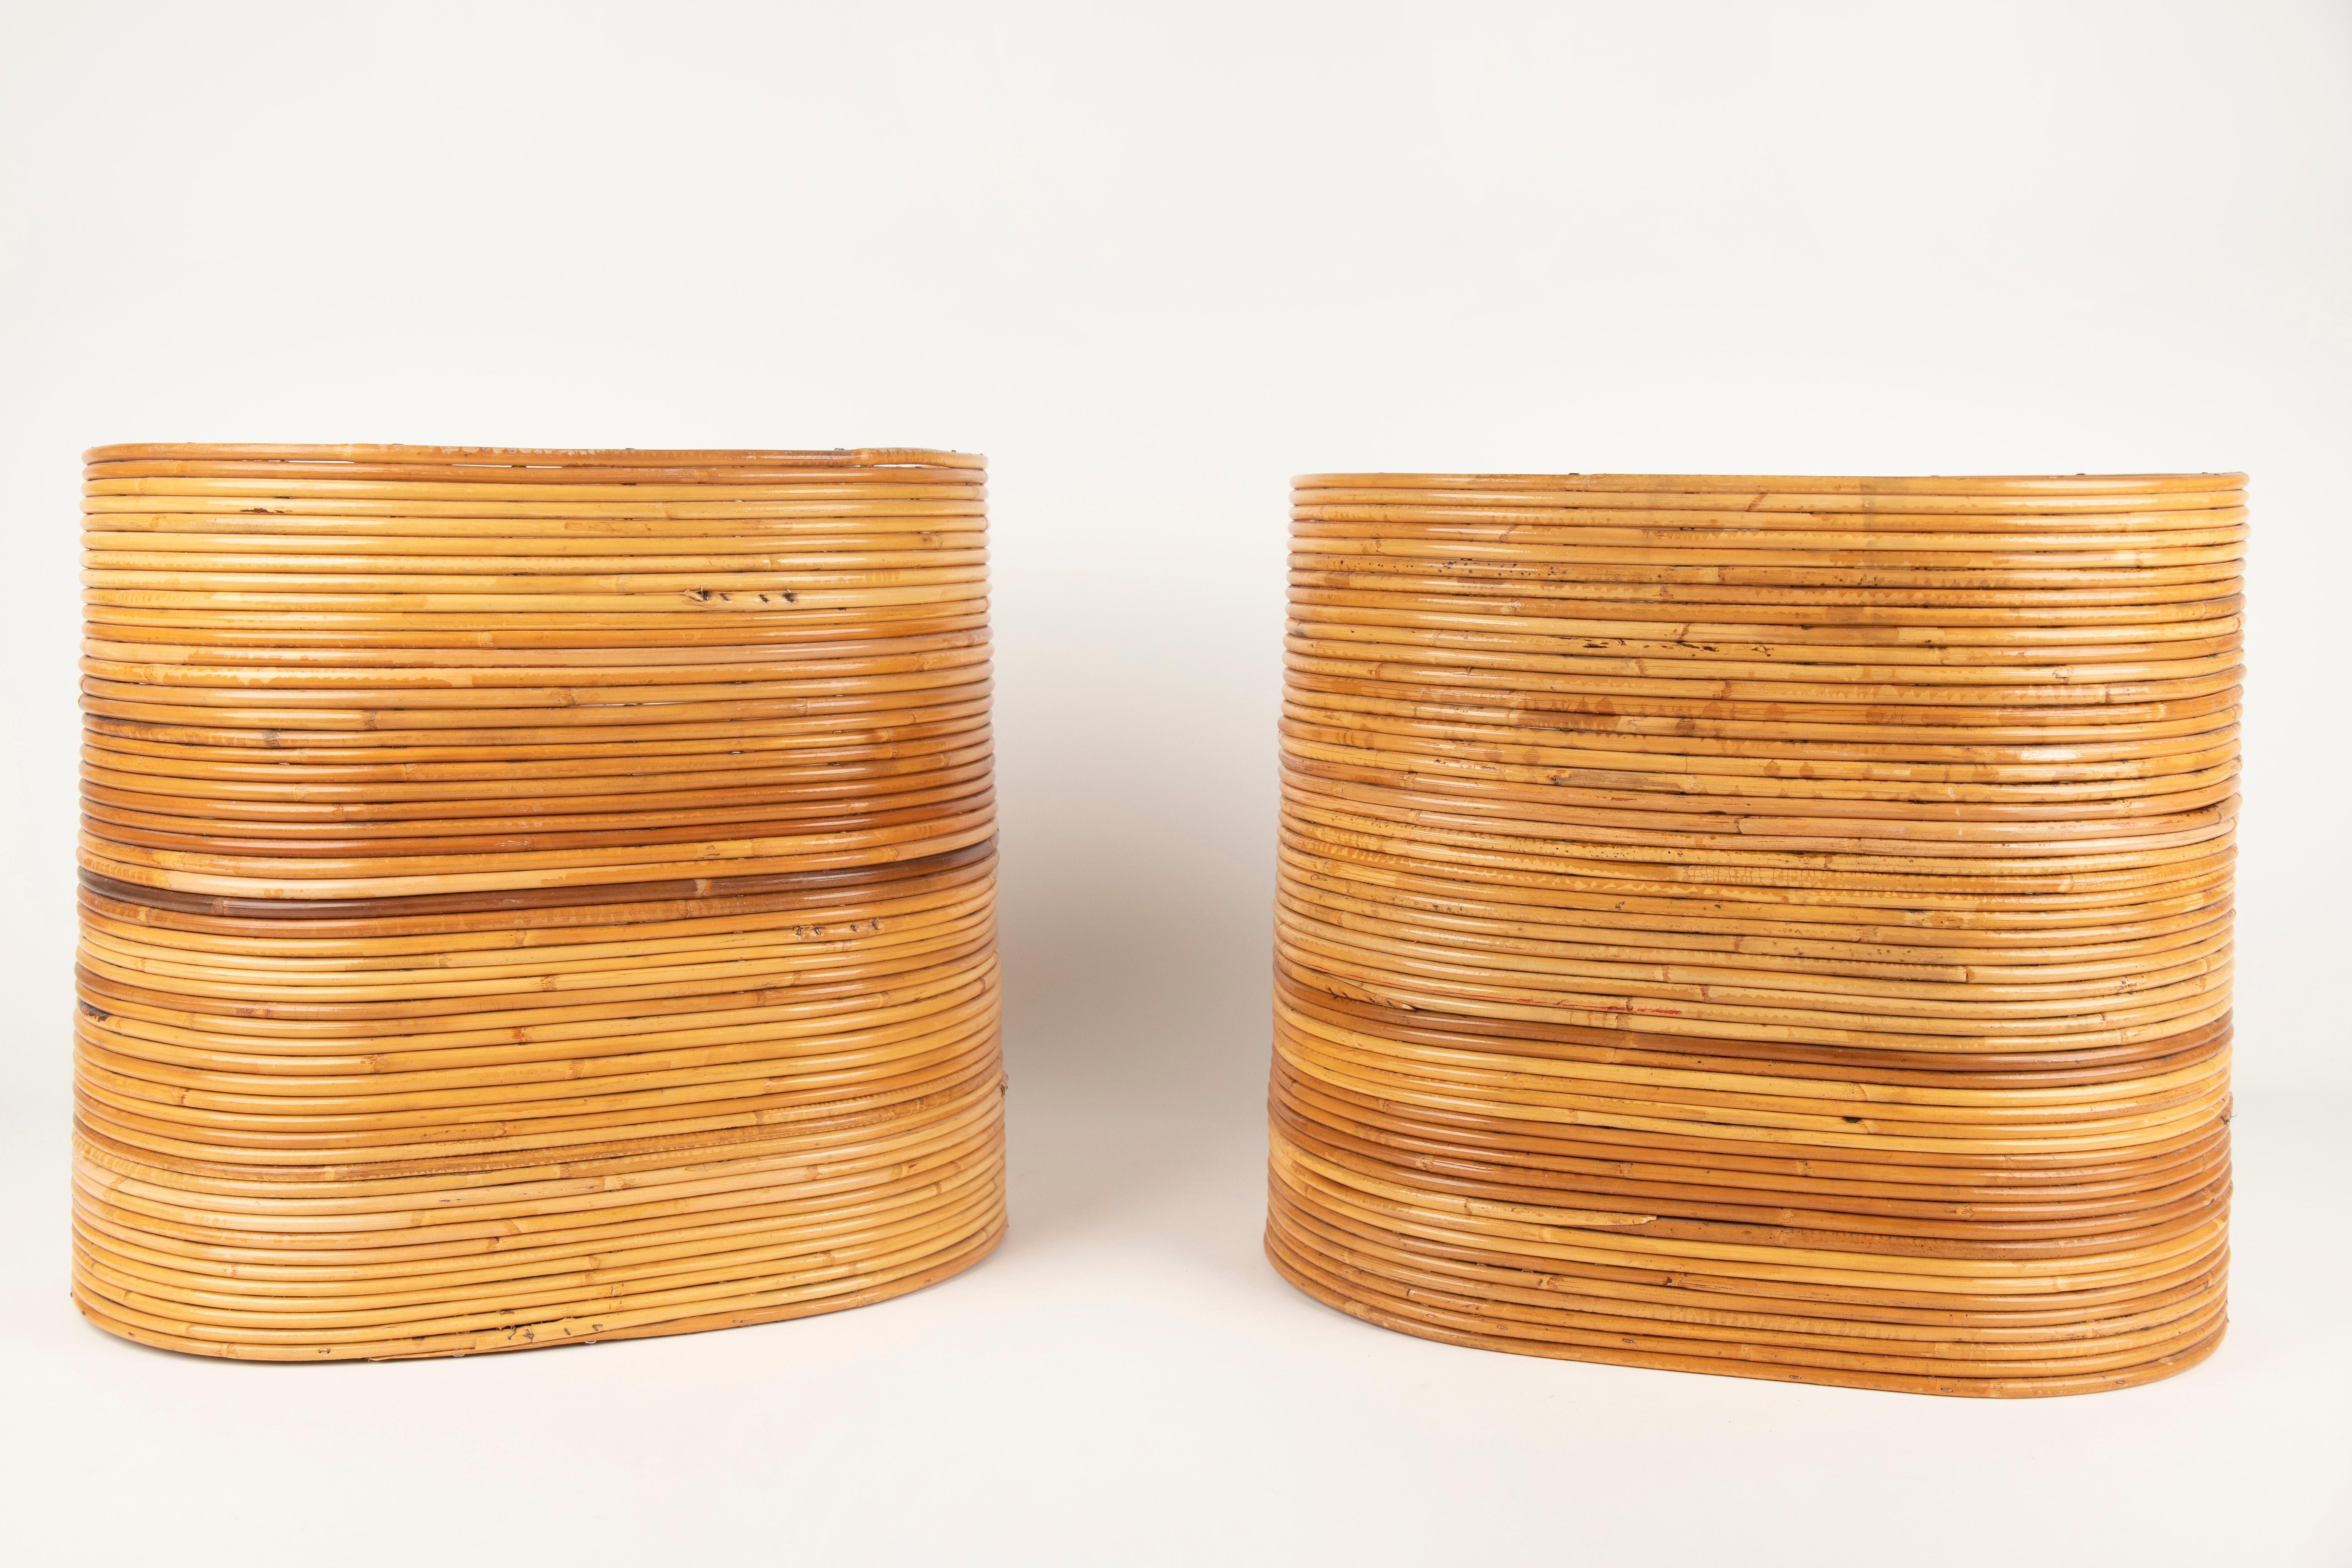 Mid-Century Modern Mid-Century Pair of Rattan and Bamboo Oval Basket Plant Holder Vase, Italy 1960s For Sale